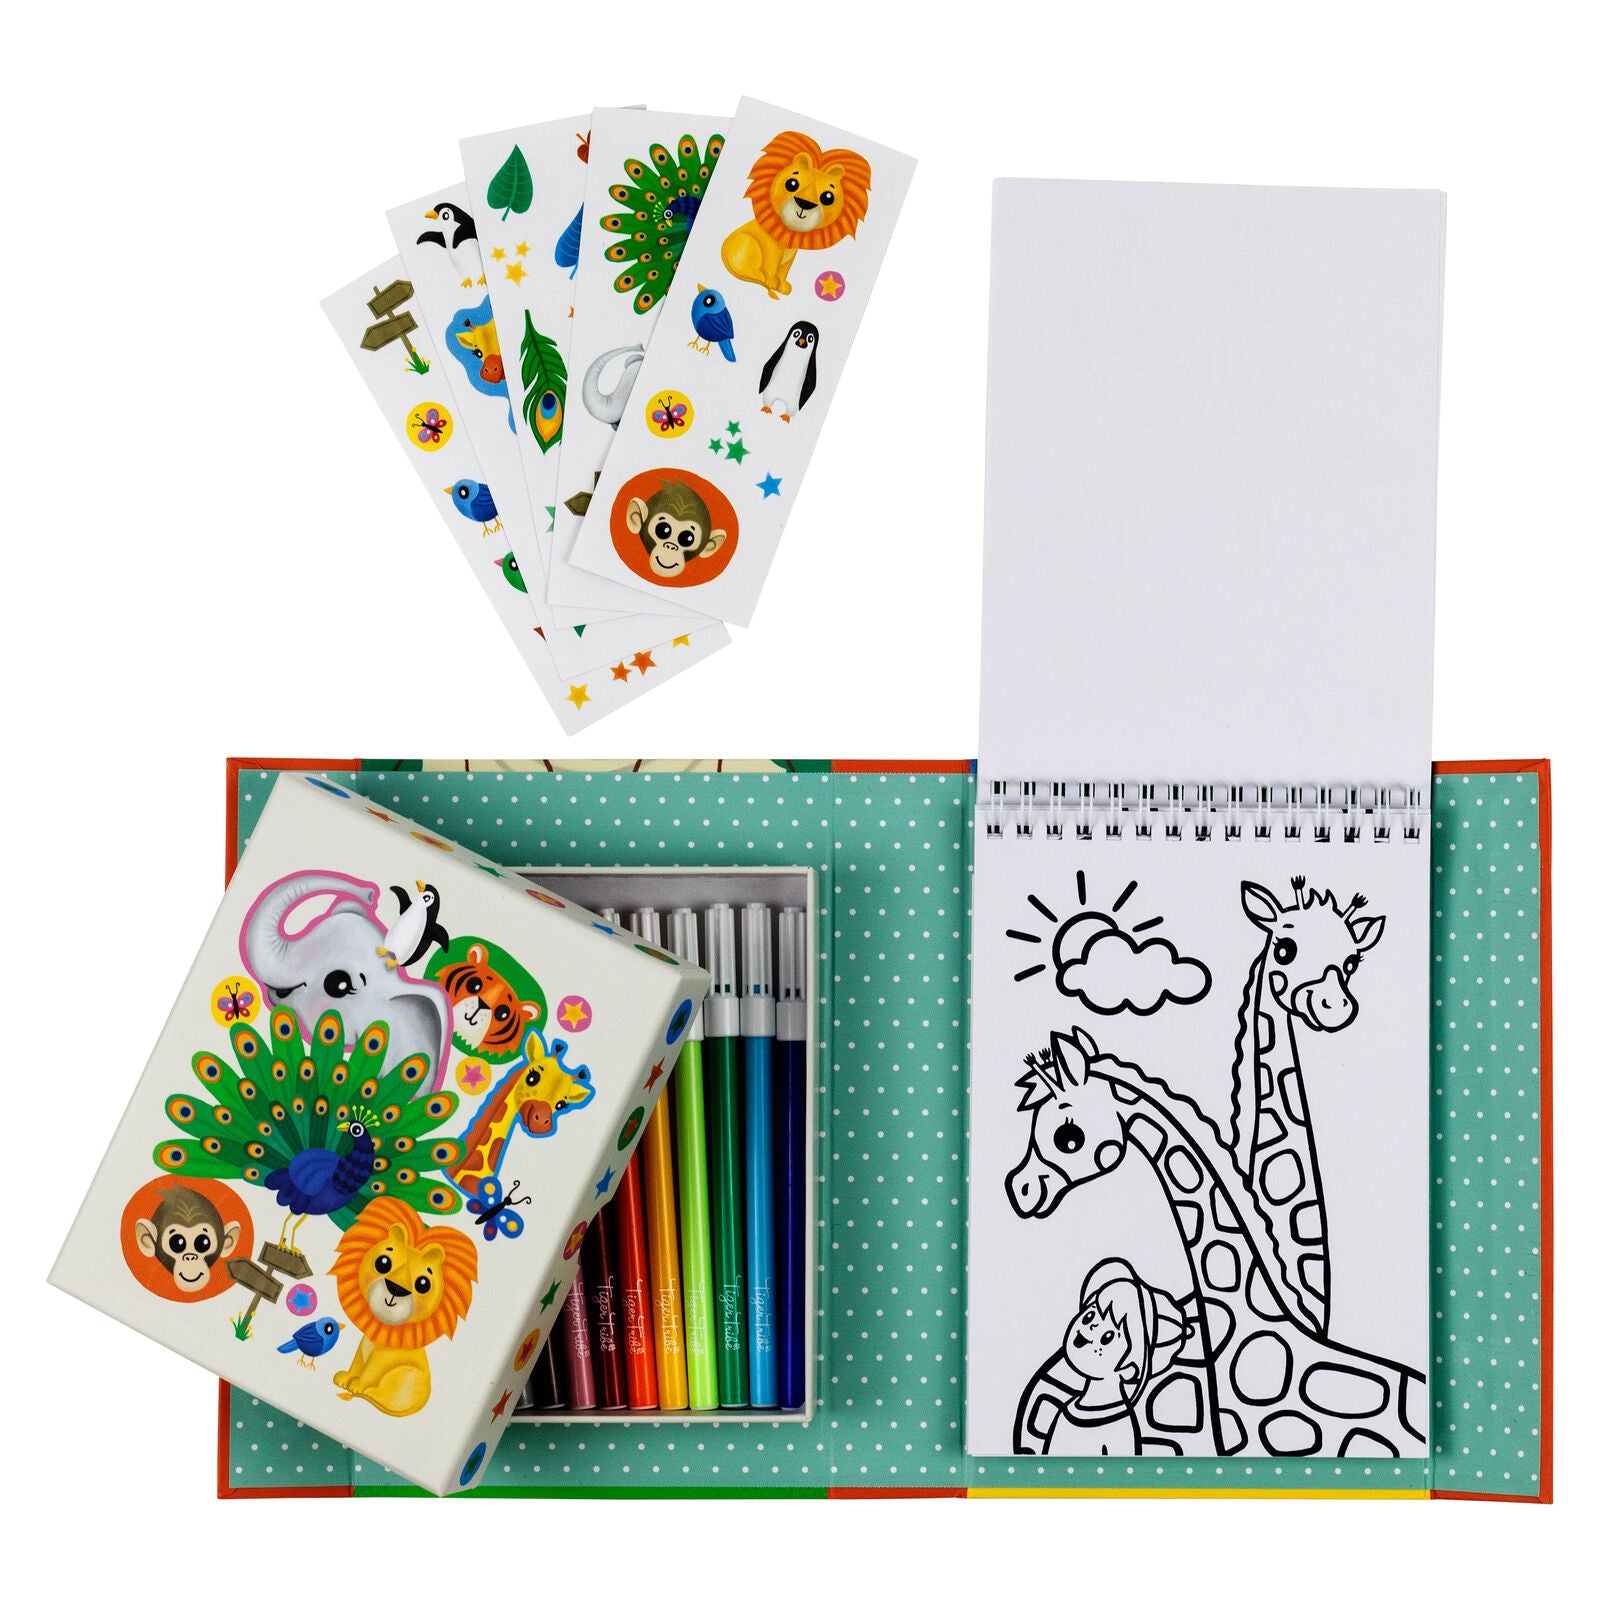 Tiger Tribe Colouring Set – Zoo